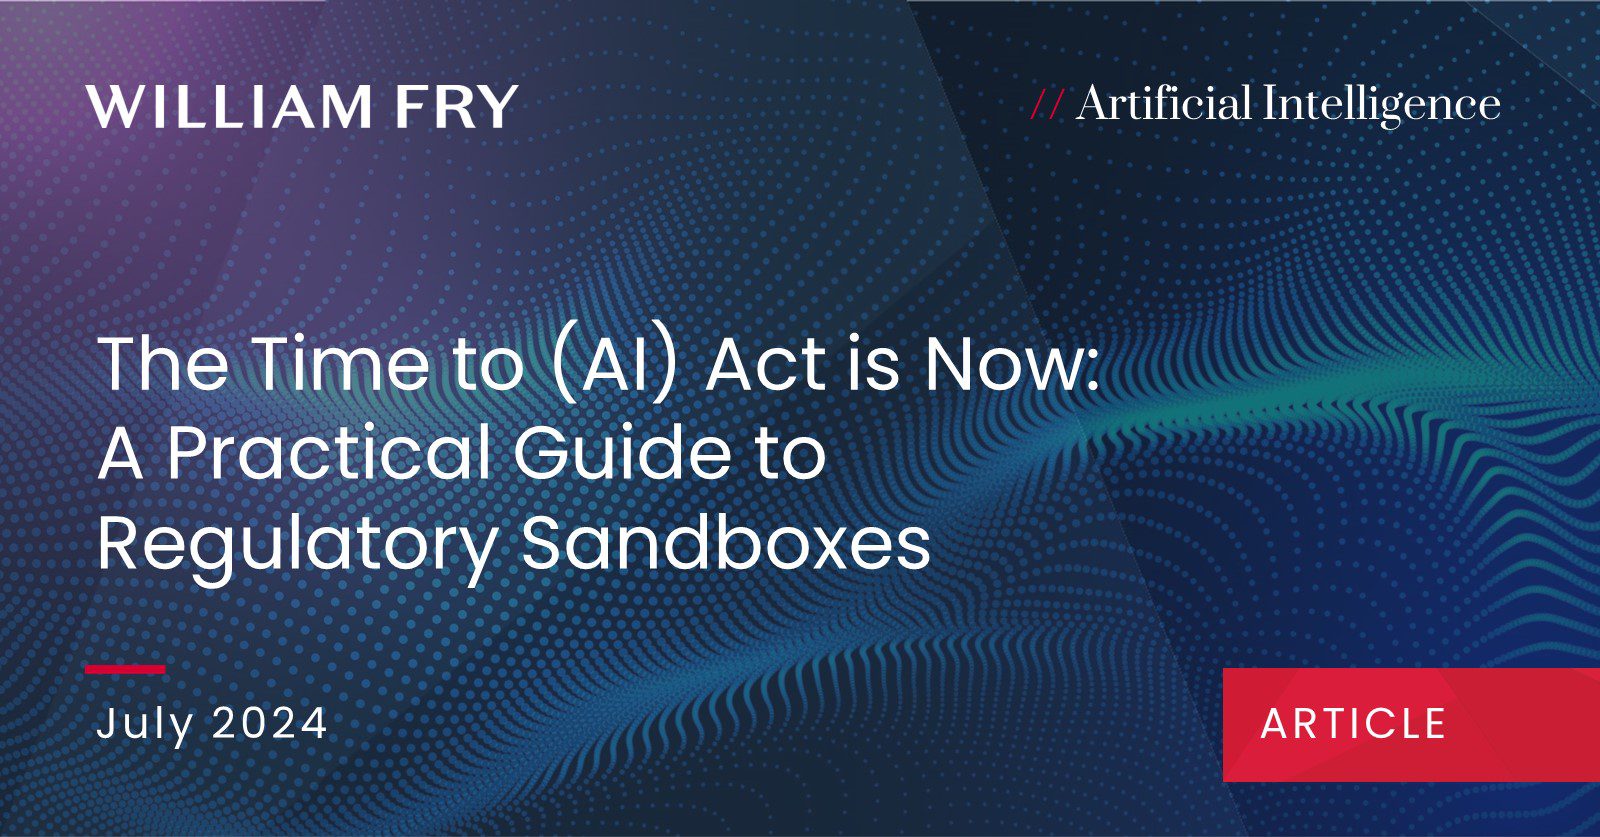 The-Time-to-AI-Act-is-Now-A-Practical-Guide-to-Regulatory-Sandboxes-Under-The-AI-Act